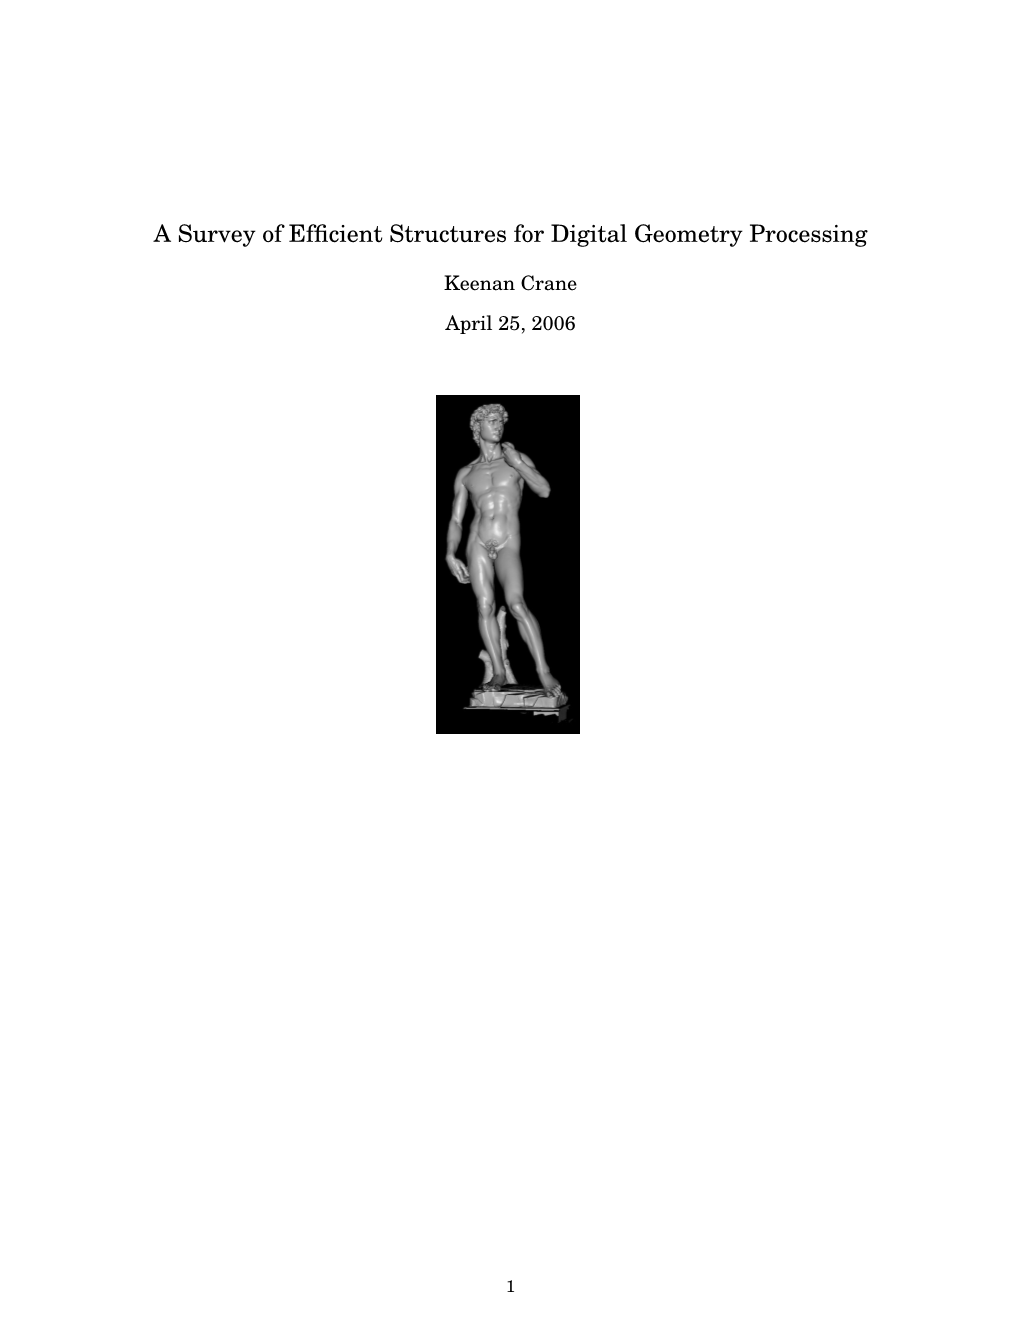 A Survey of Efficient Structures for Digital Geometry Processing